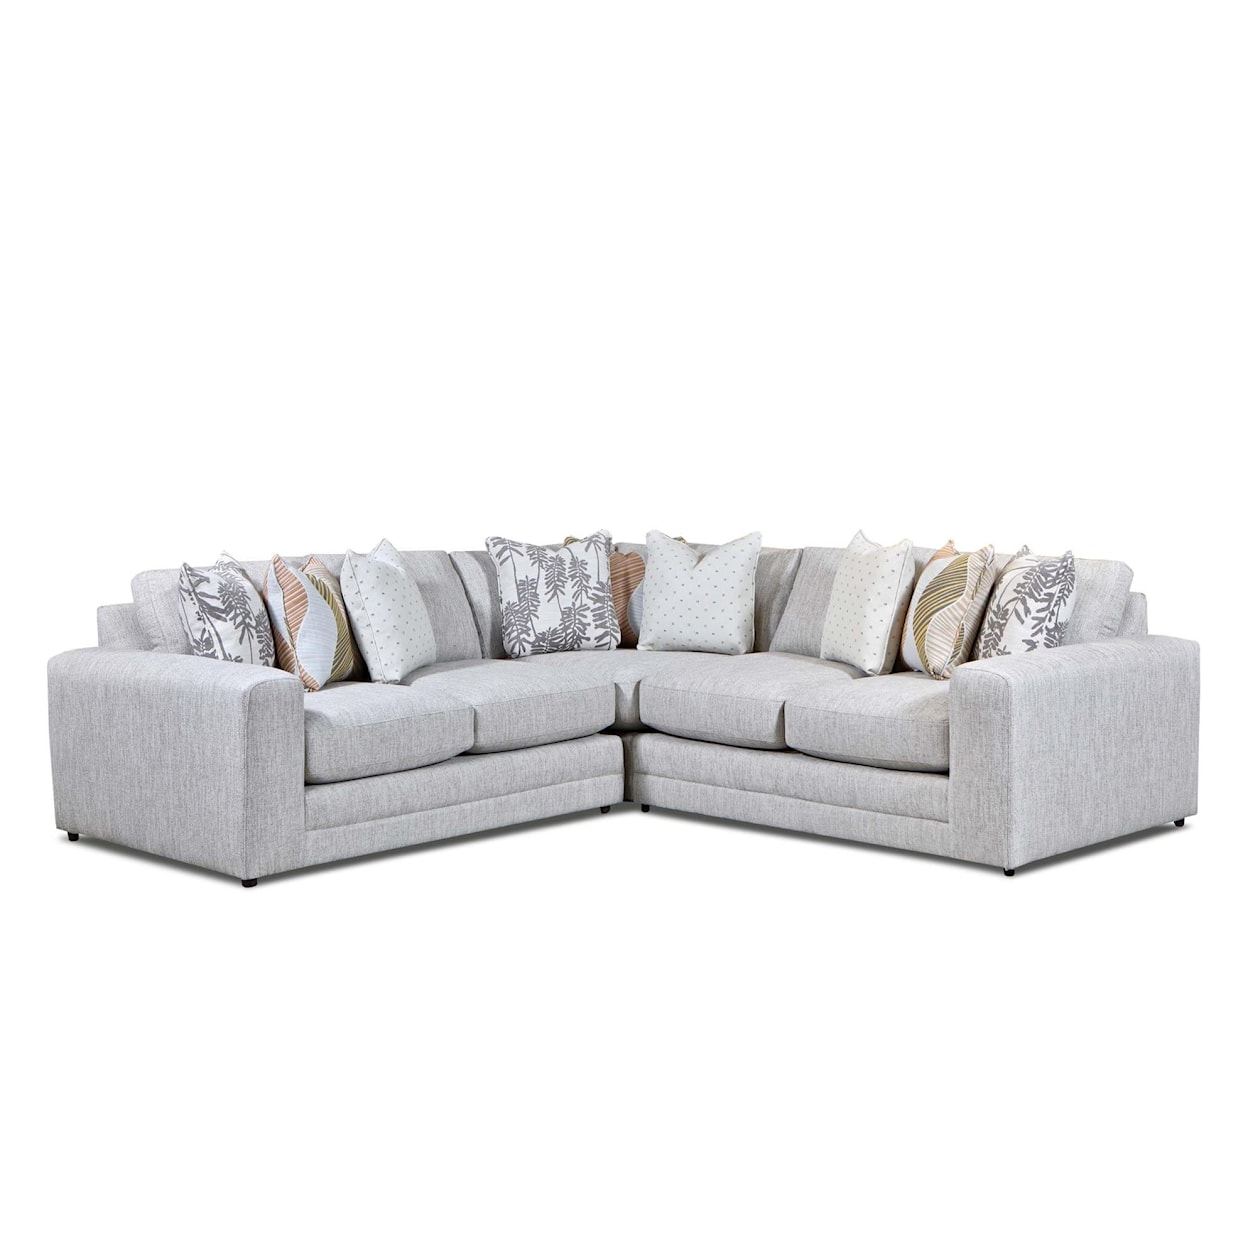 VFM Signature 7000 LOXLEY COCONUT Sectional